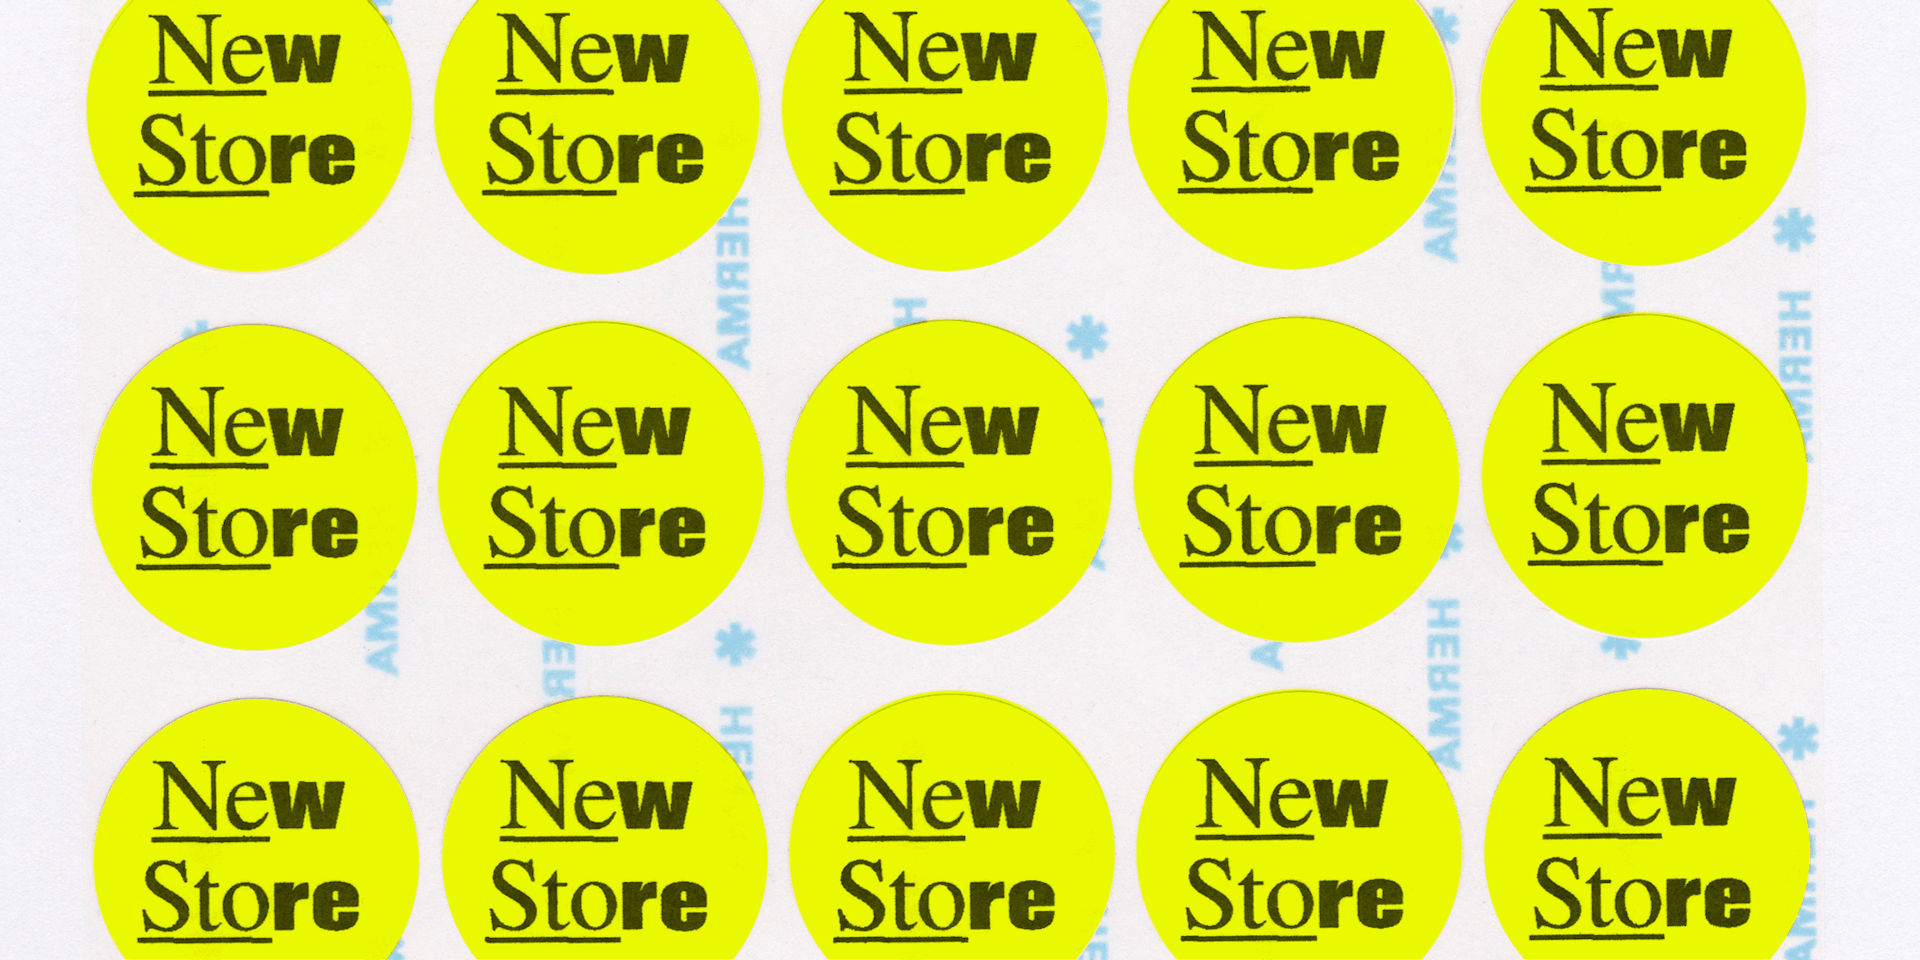 Graphic image featuring a grid of yellow round stickers, each sticker with the text 'New Store'